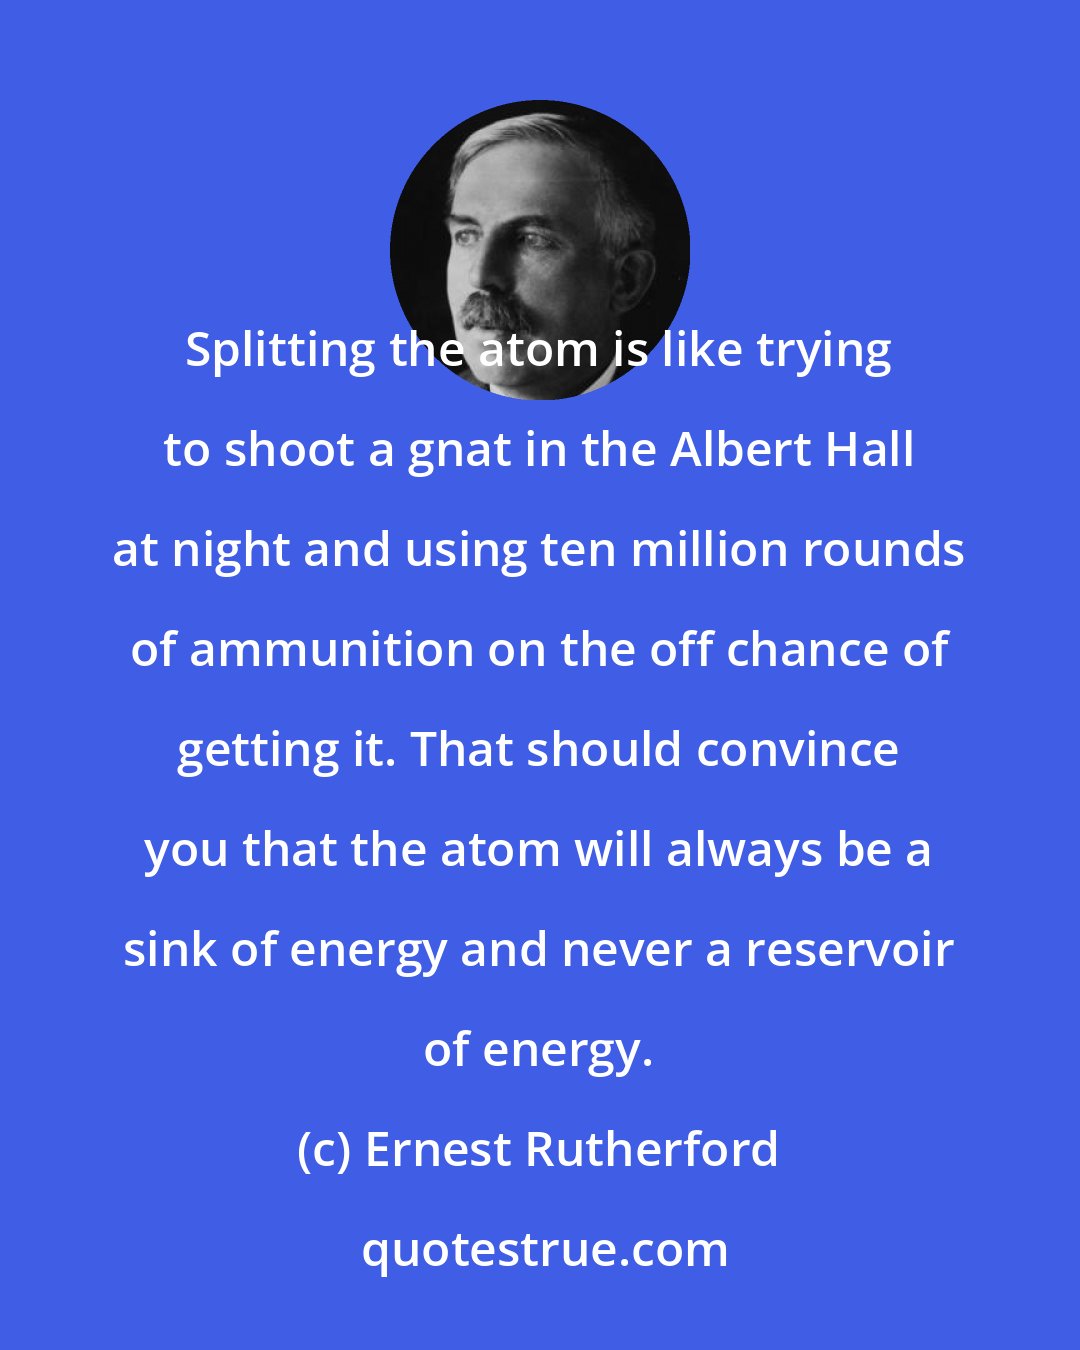 Ernest Rutherford: Splitting the atom is like trying to shoot a gnat in the Albert Hall at night and using ten million rounds of ammunition on the off chance of getting it. That should convince you that the atom will always be a sink of energy and never a reservoir of energy.